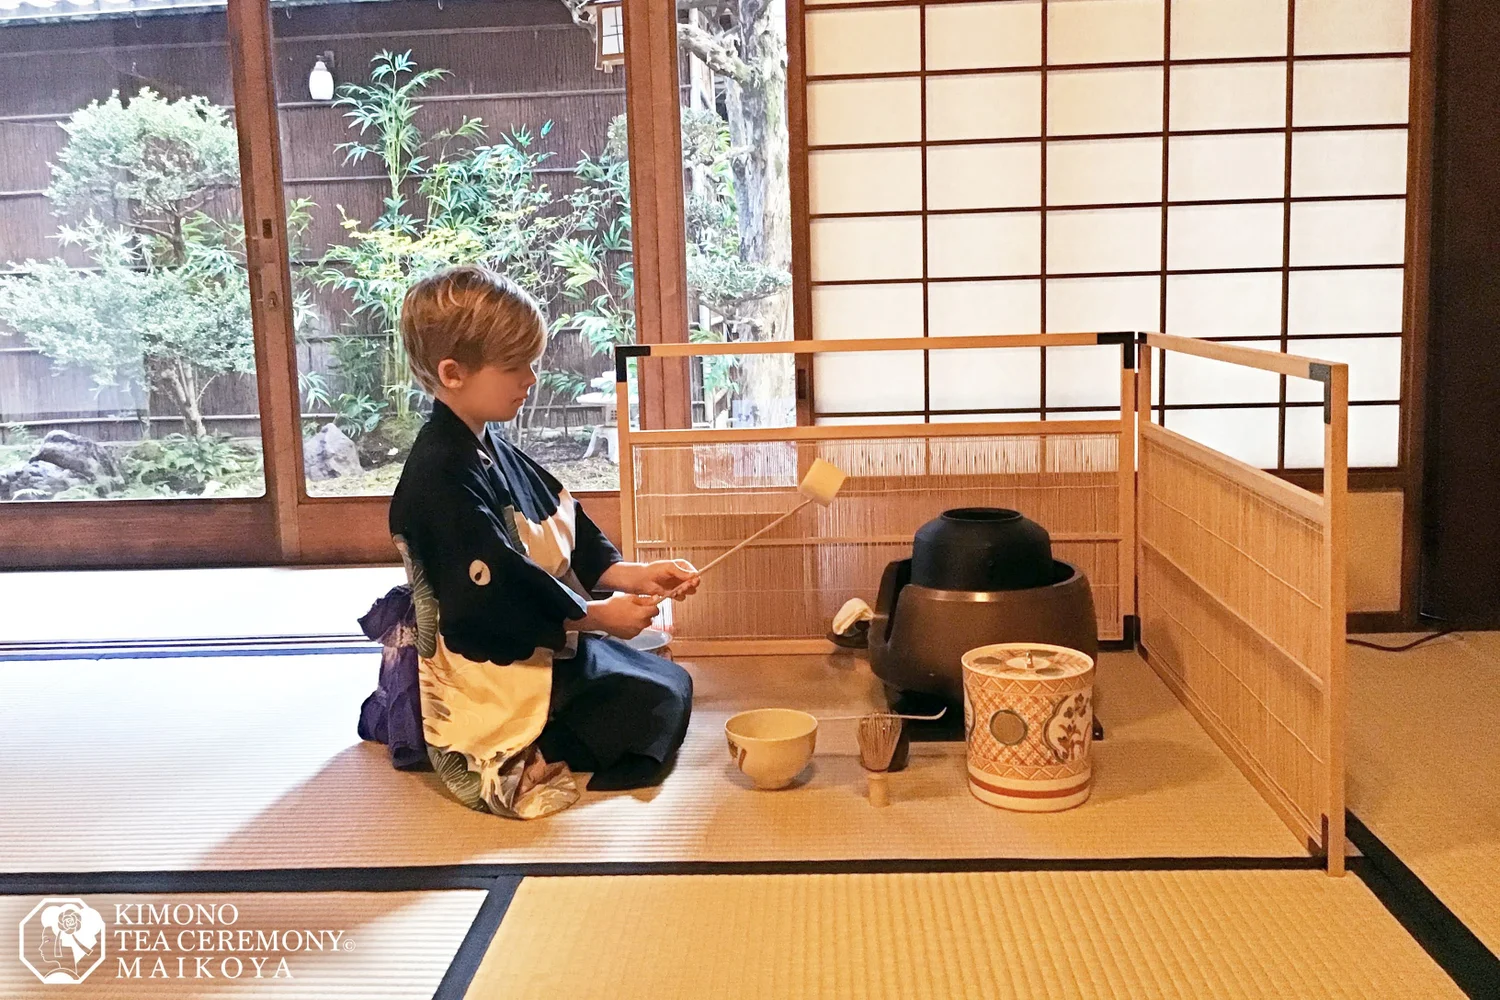 Kyoto Tea Ceremony Experience with Children Reservation ＜With kimono rental/Recommended for families＞